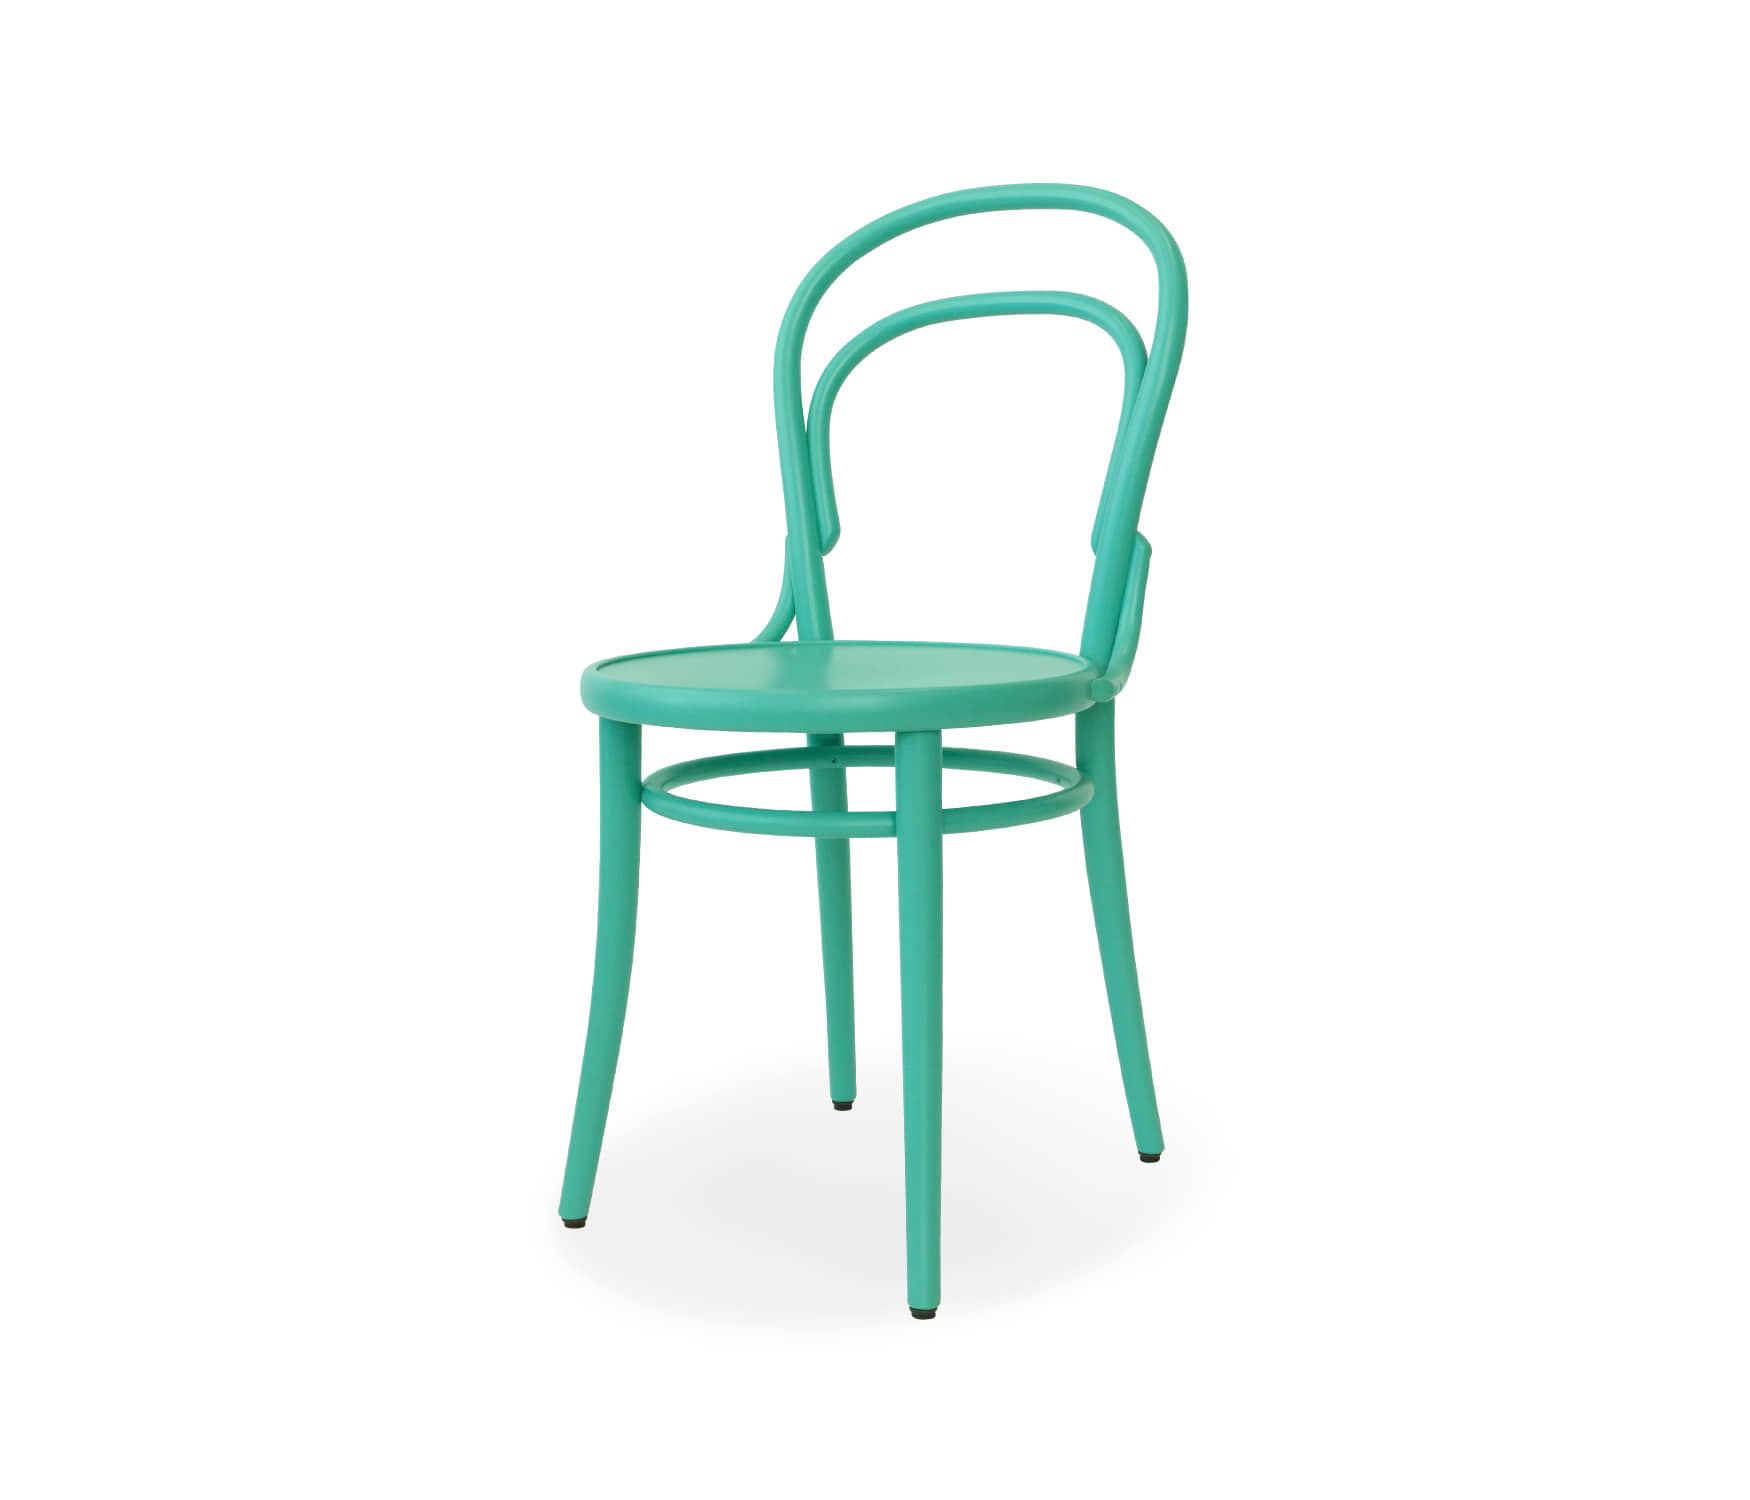 Chair 14 - Turquoise Green